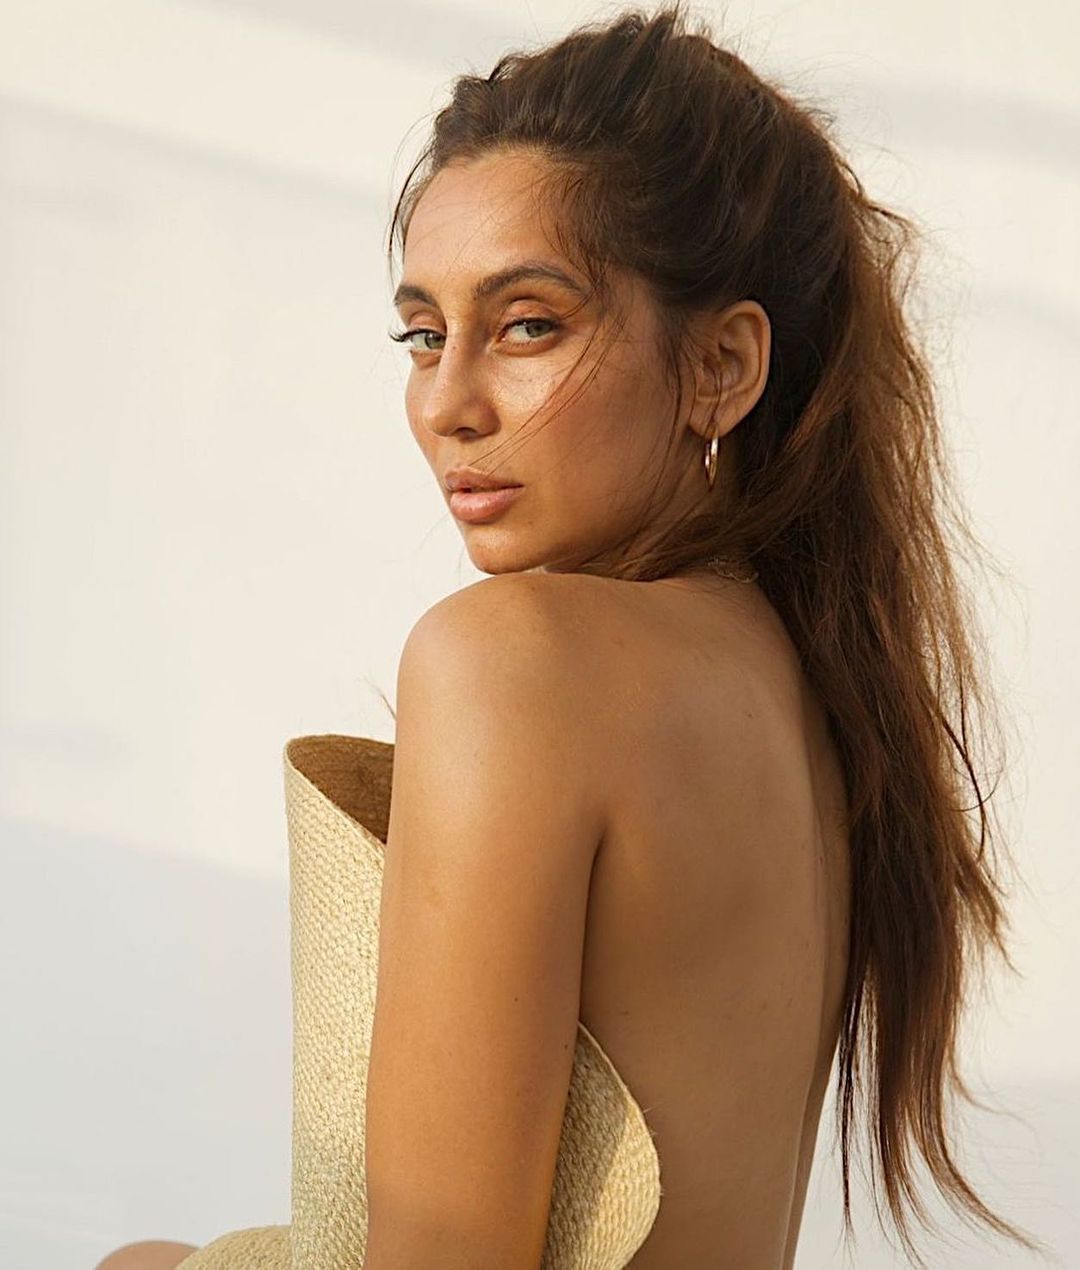 Anusha Dandekar passes sexy vibes in her photos like no other. Scrol ahead to take a look